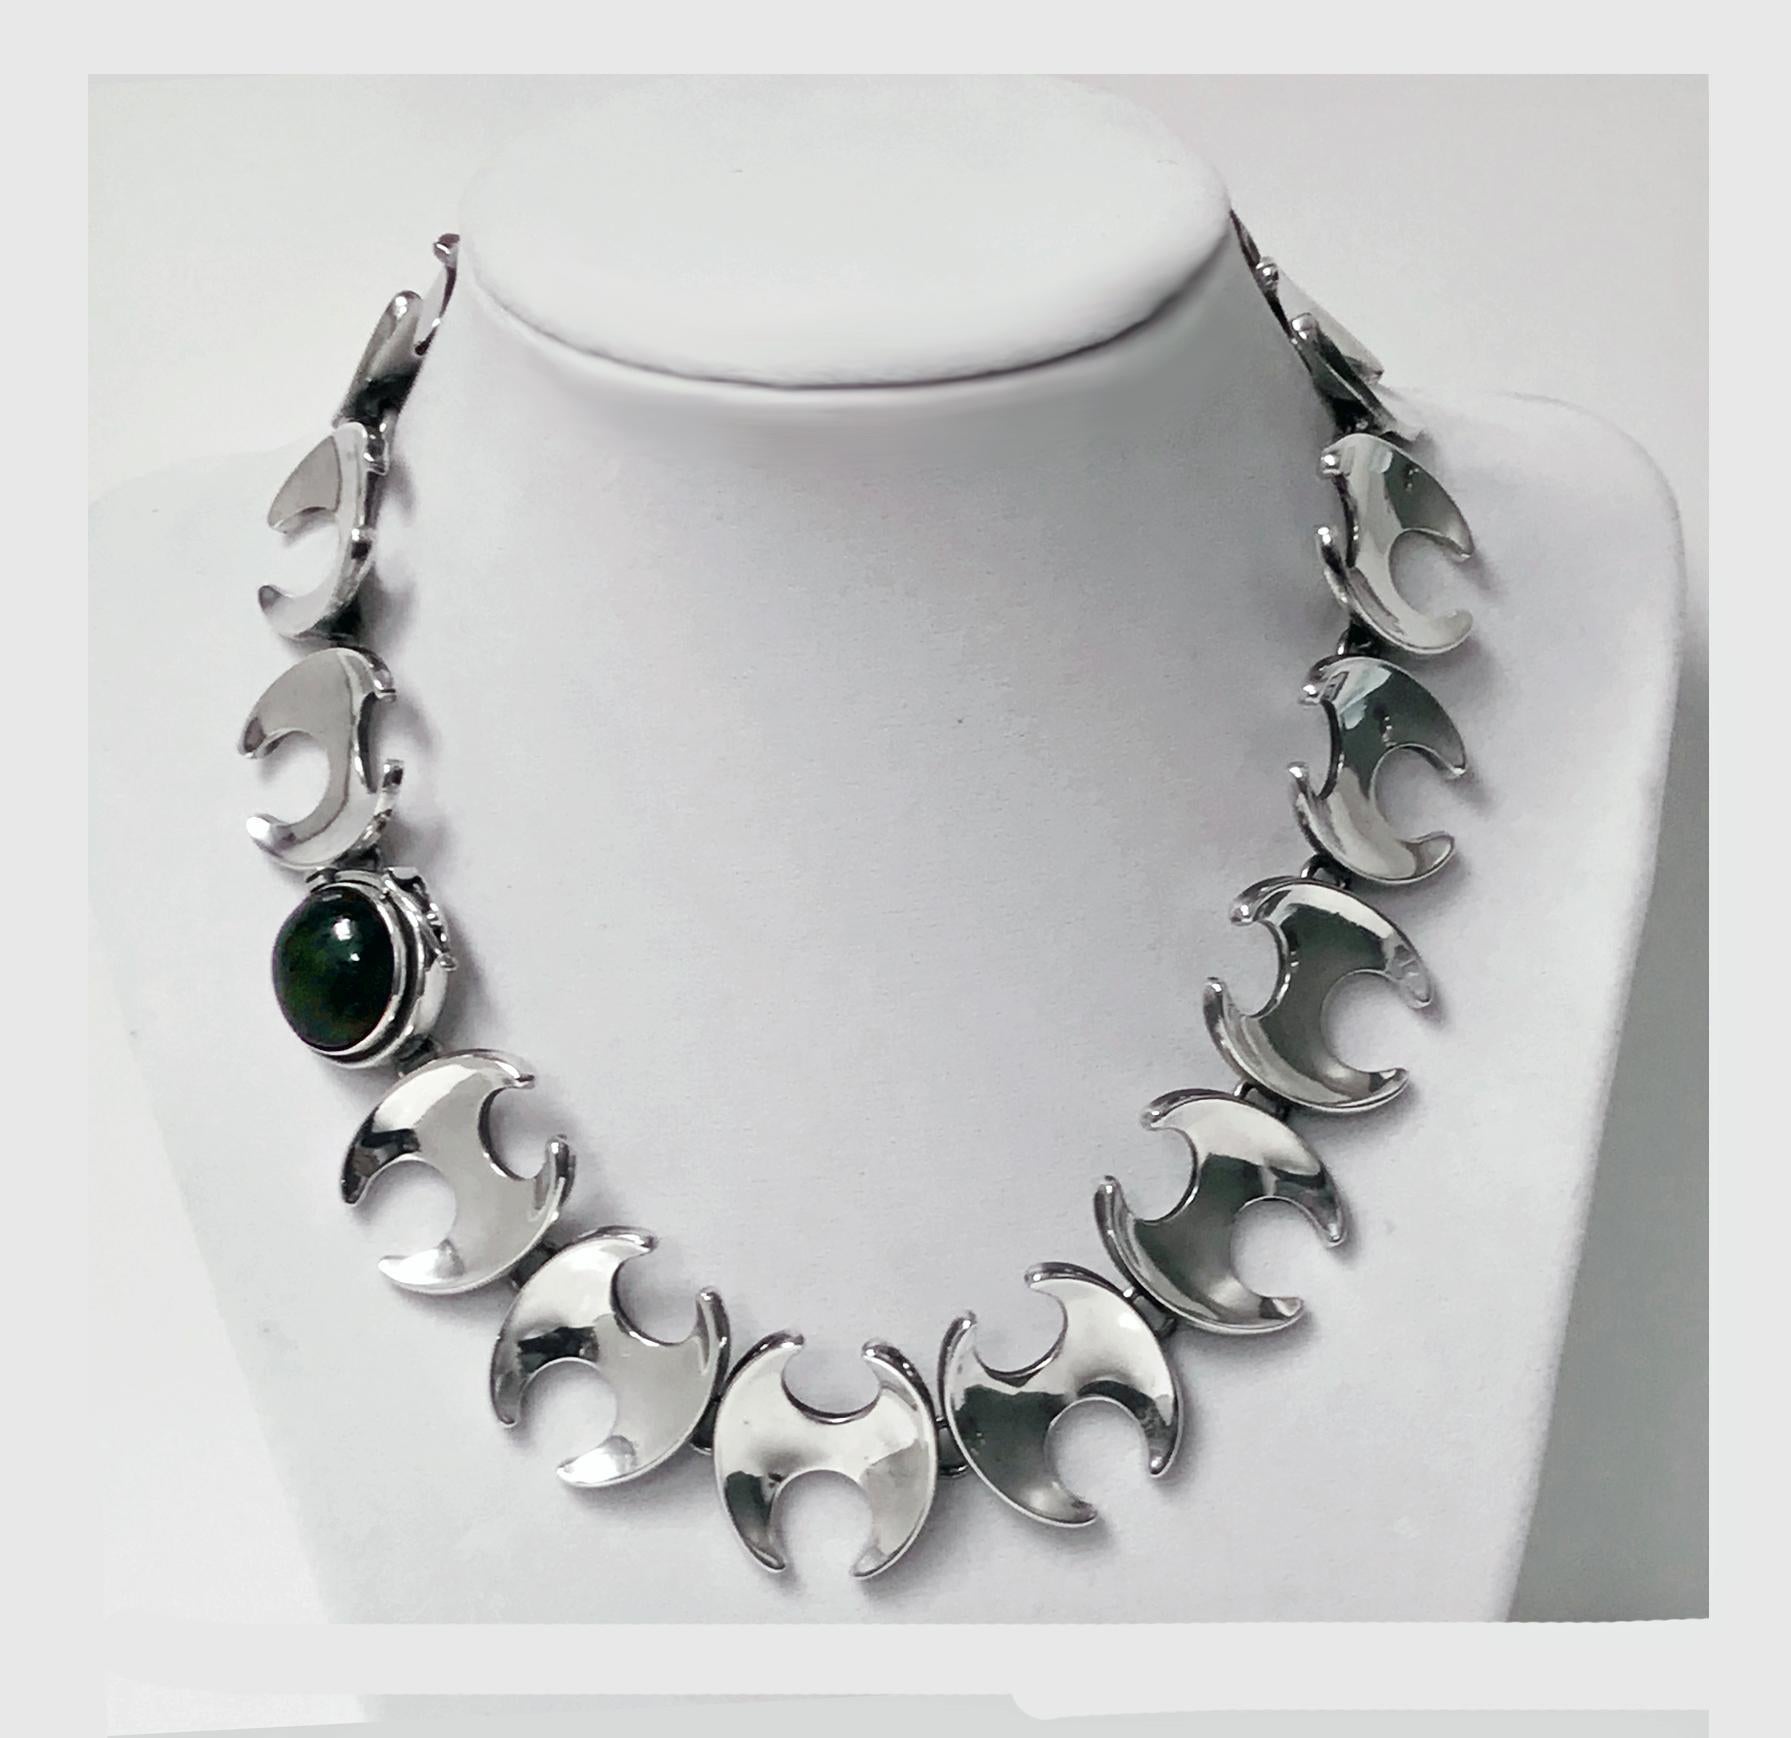 Rare Vintage Georg Jensen Henning Koppel Sterling Silver Necklace is set with nephrite clasp. Designed by Henning Koppel in Koppel’s signature  H design for Georg Jensen probably in the 1950’s. It is marked with the post 1945 Georg Jensen mark and